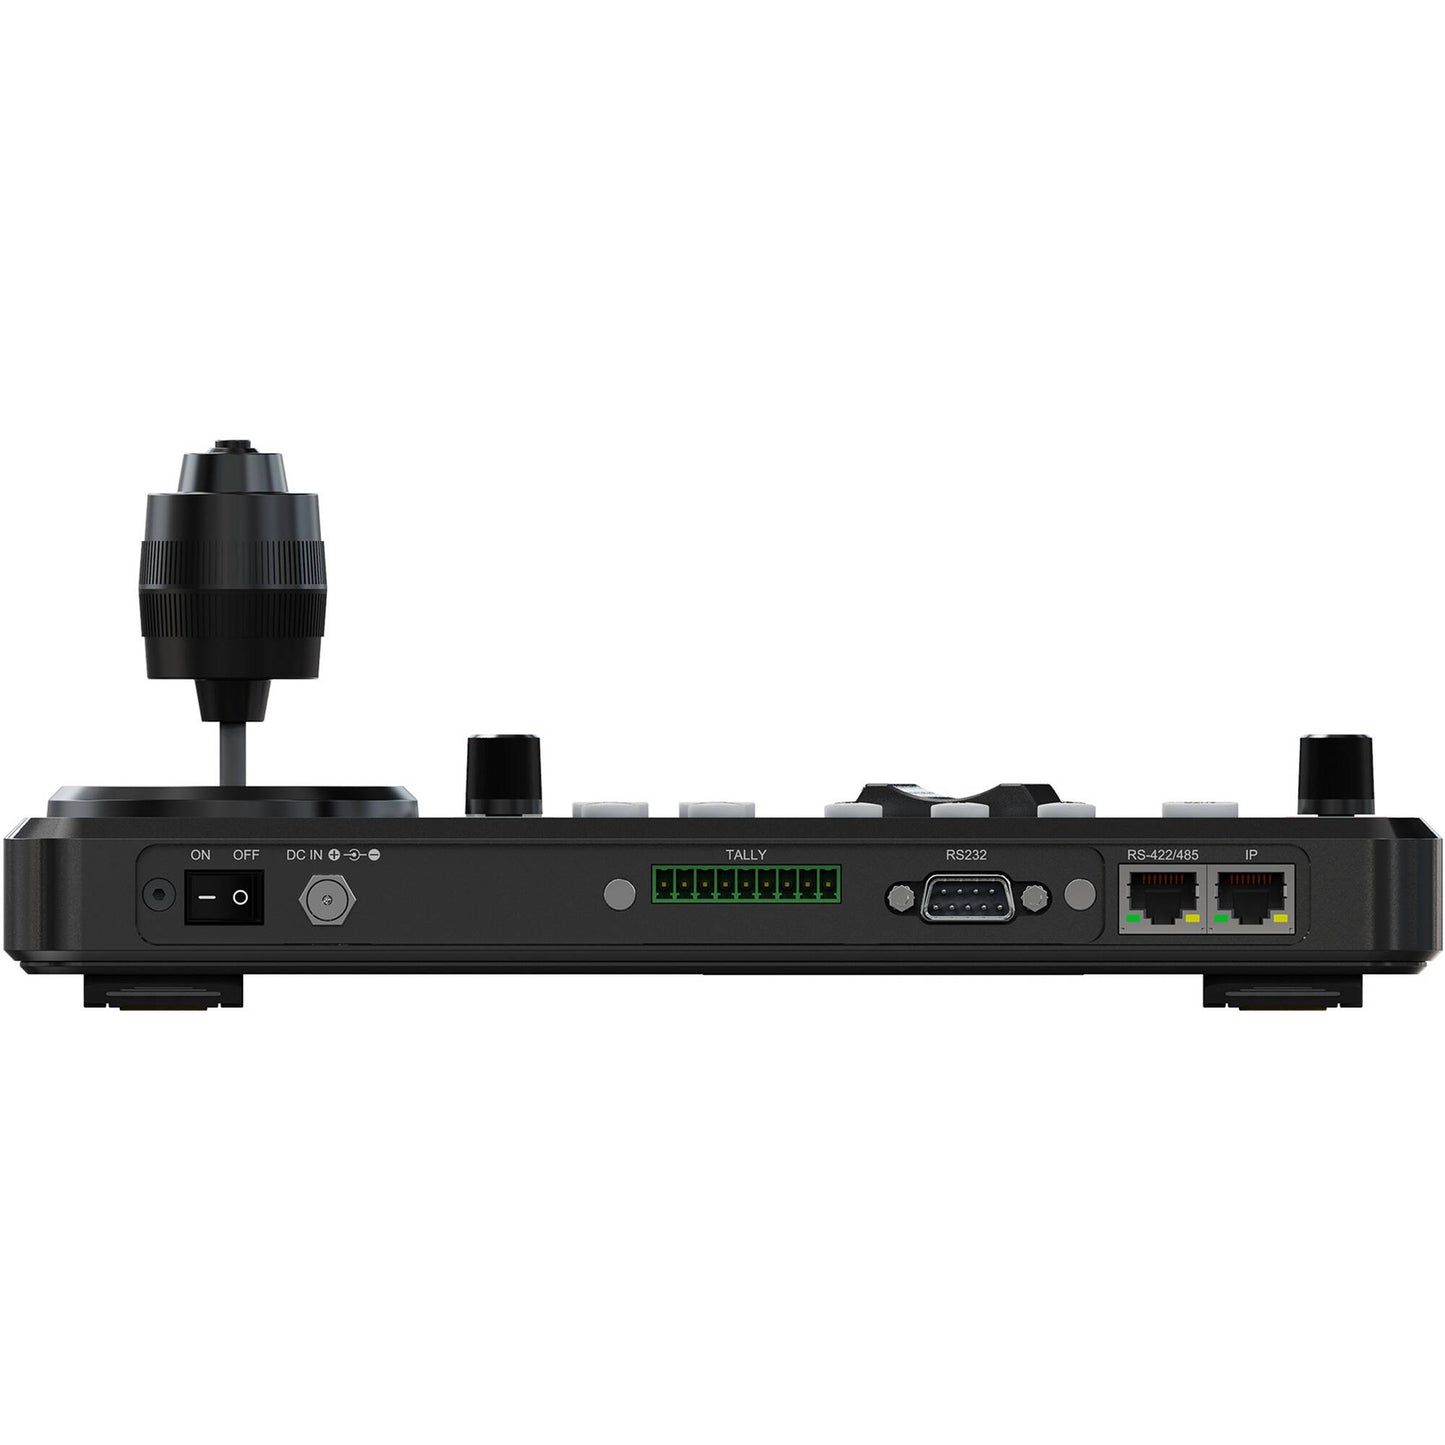 AVMatrix PKC3000 4 Channel 3G-SDI Split Multiviewer with SDI & HDMI Output, 11 Output Formats Selectable Up to 1080p 60Hz, 16 Preset Layouts, Easy Control over DIP Switches, LAN & USB Port, PC Software and USB Keyboard Control Methods